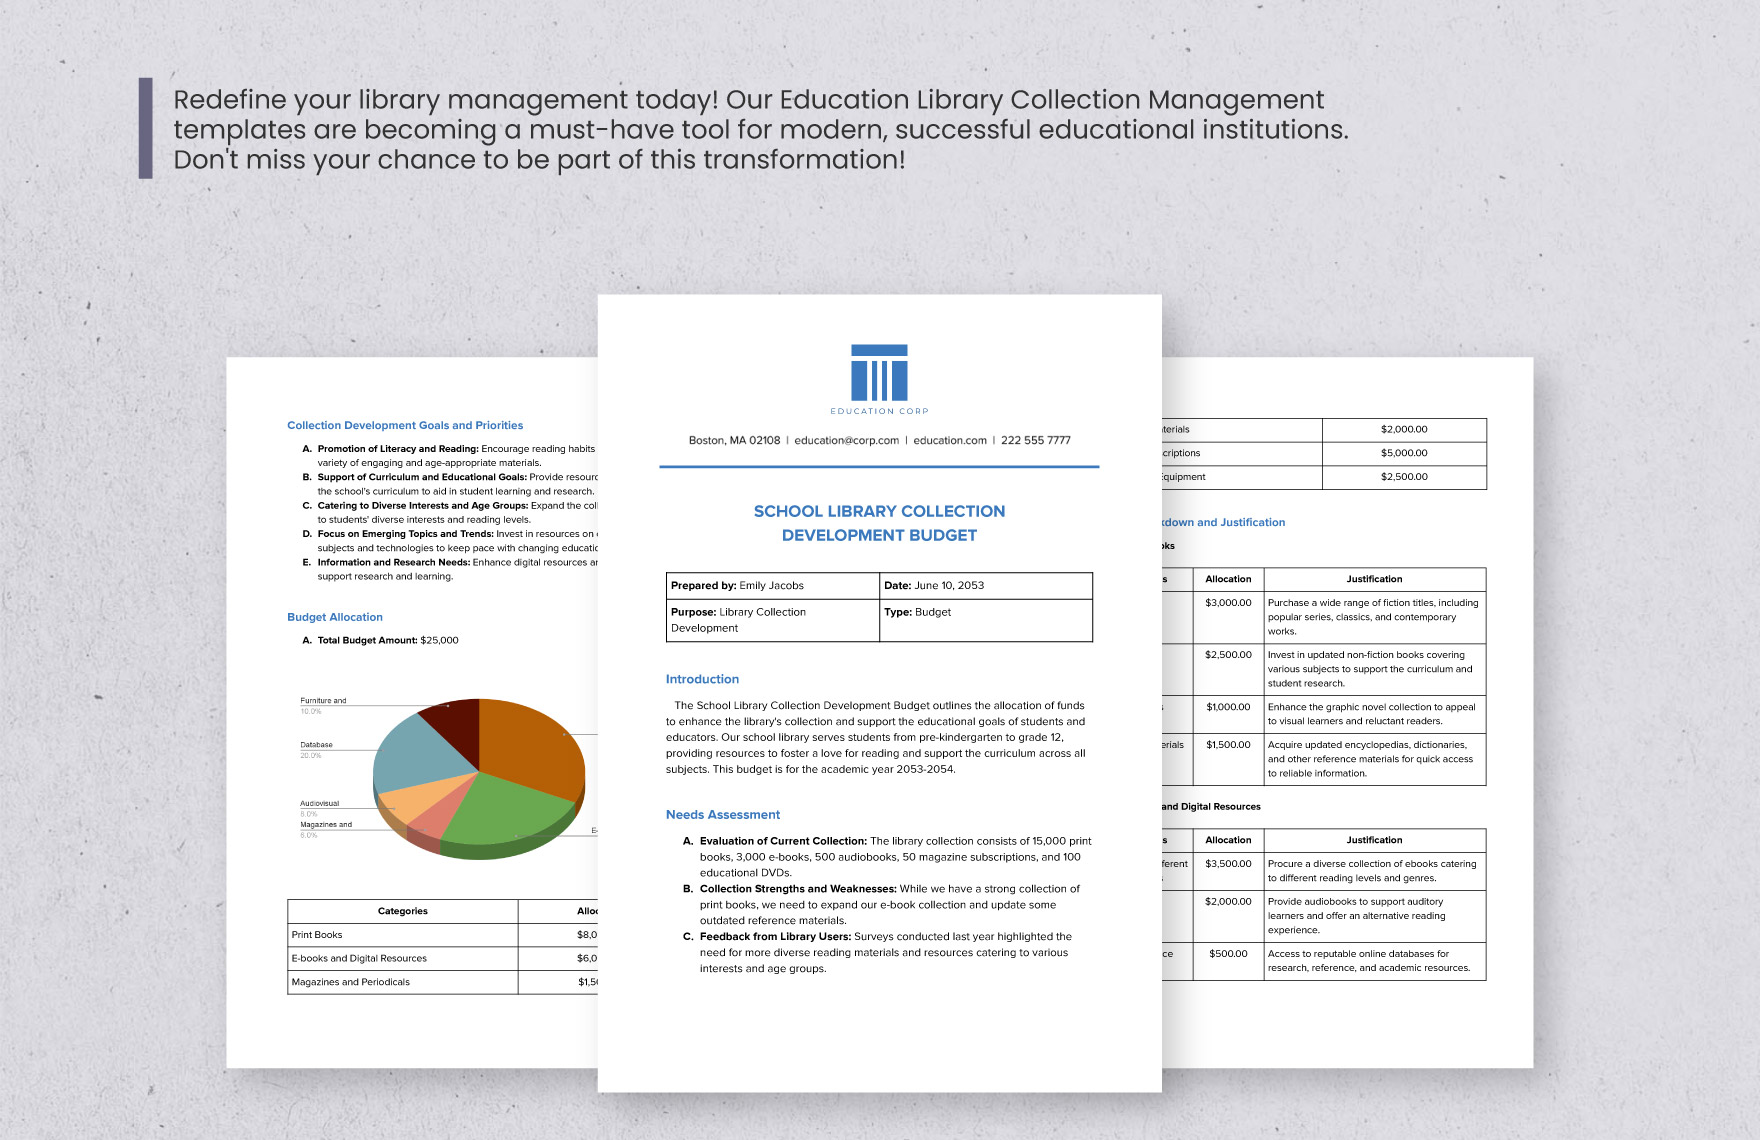 School Library Collection Development Budget Template